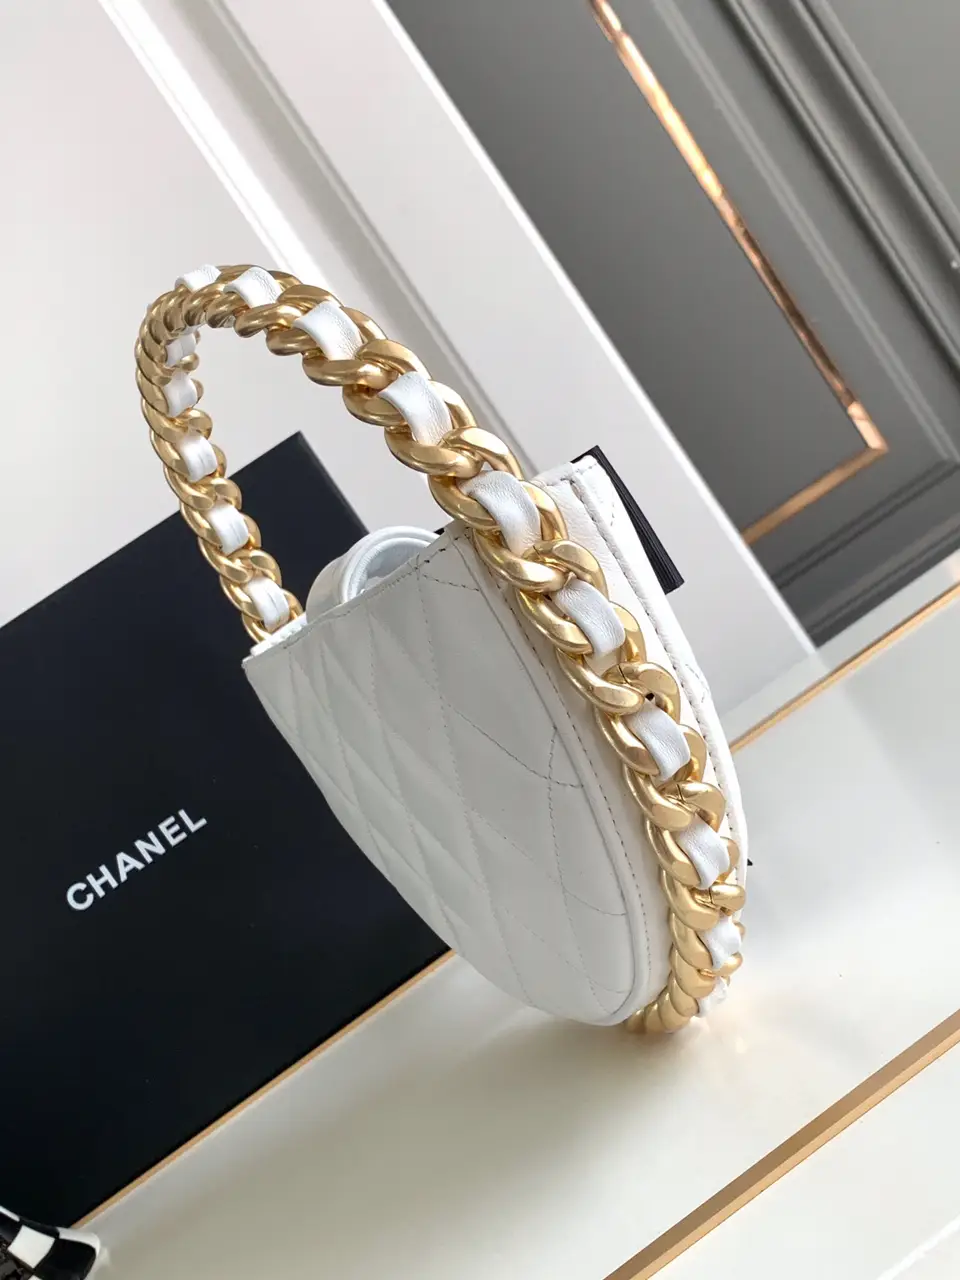 Chanel camellia cute bag🧚🧚🧚, Gallery posted by Vivian💗💗💗